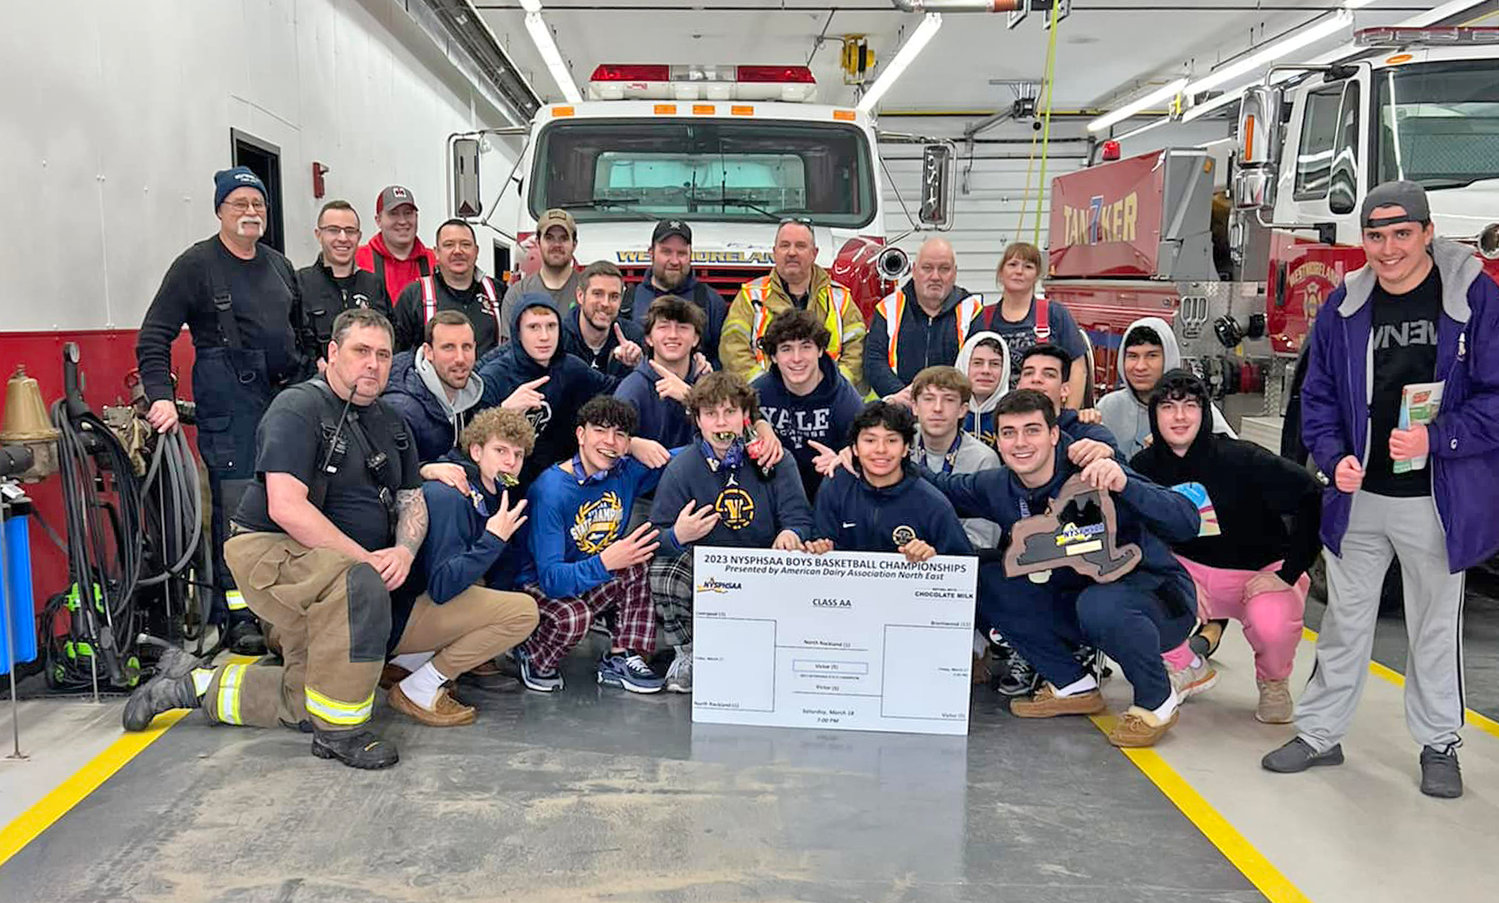 The members of the Section AA state basketball championship team from Victor pose with the Westmoreland Fire Department after their bus got caught in Sunday afternoon’s snow squall on the Thruway. Fire officials said they opened their fire station for the players to wait for a replacement bus to complete the journey home.